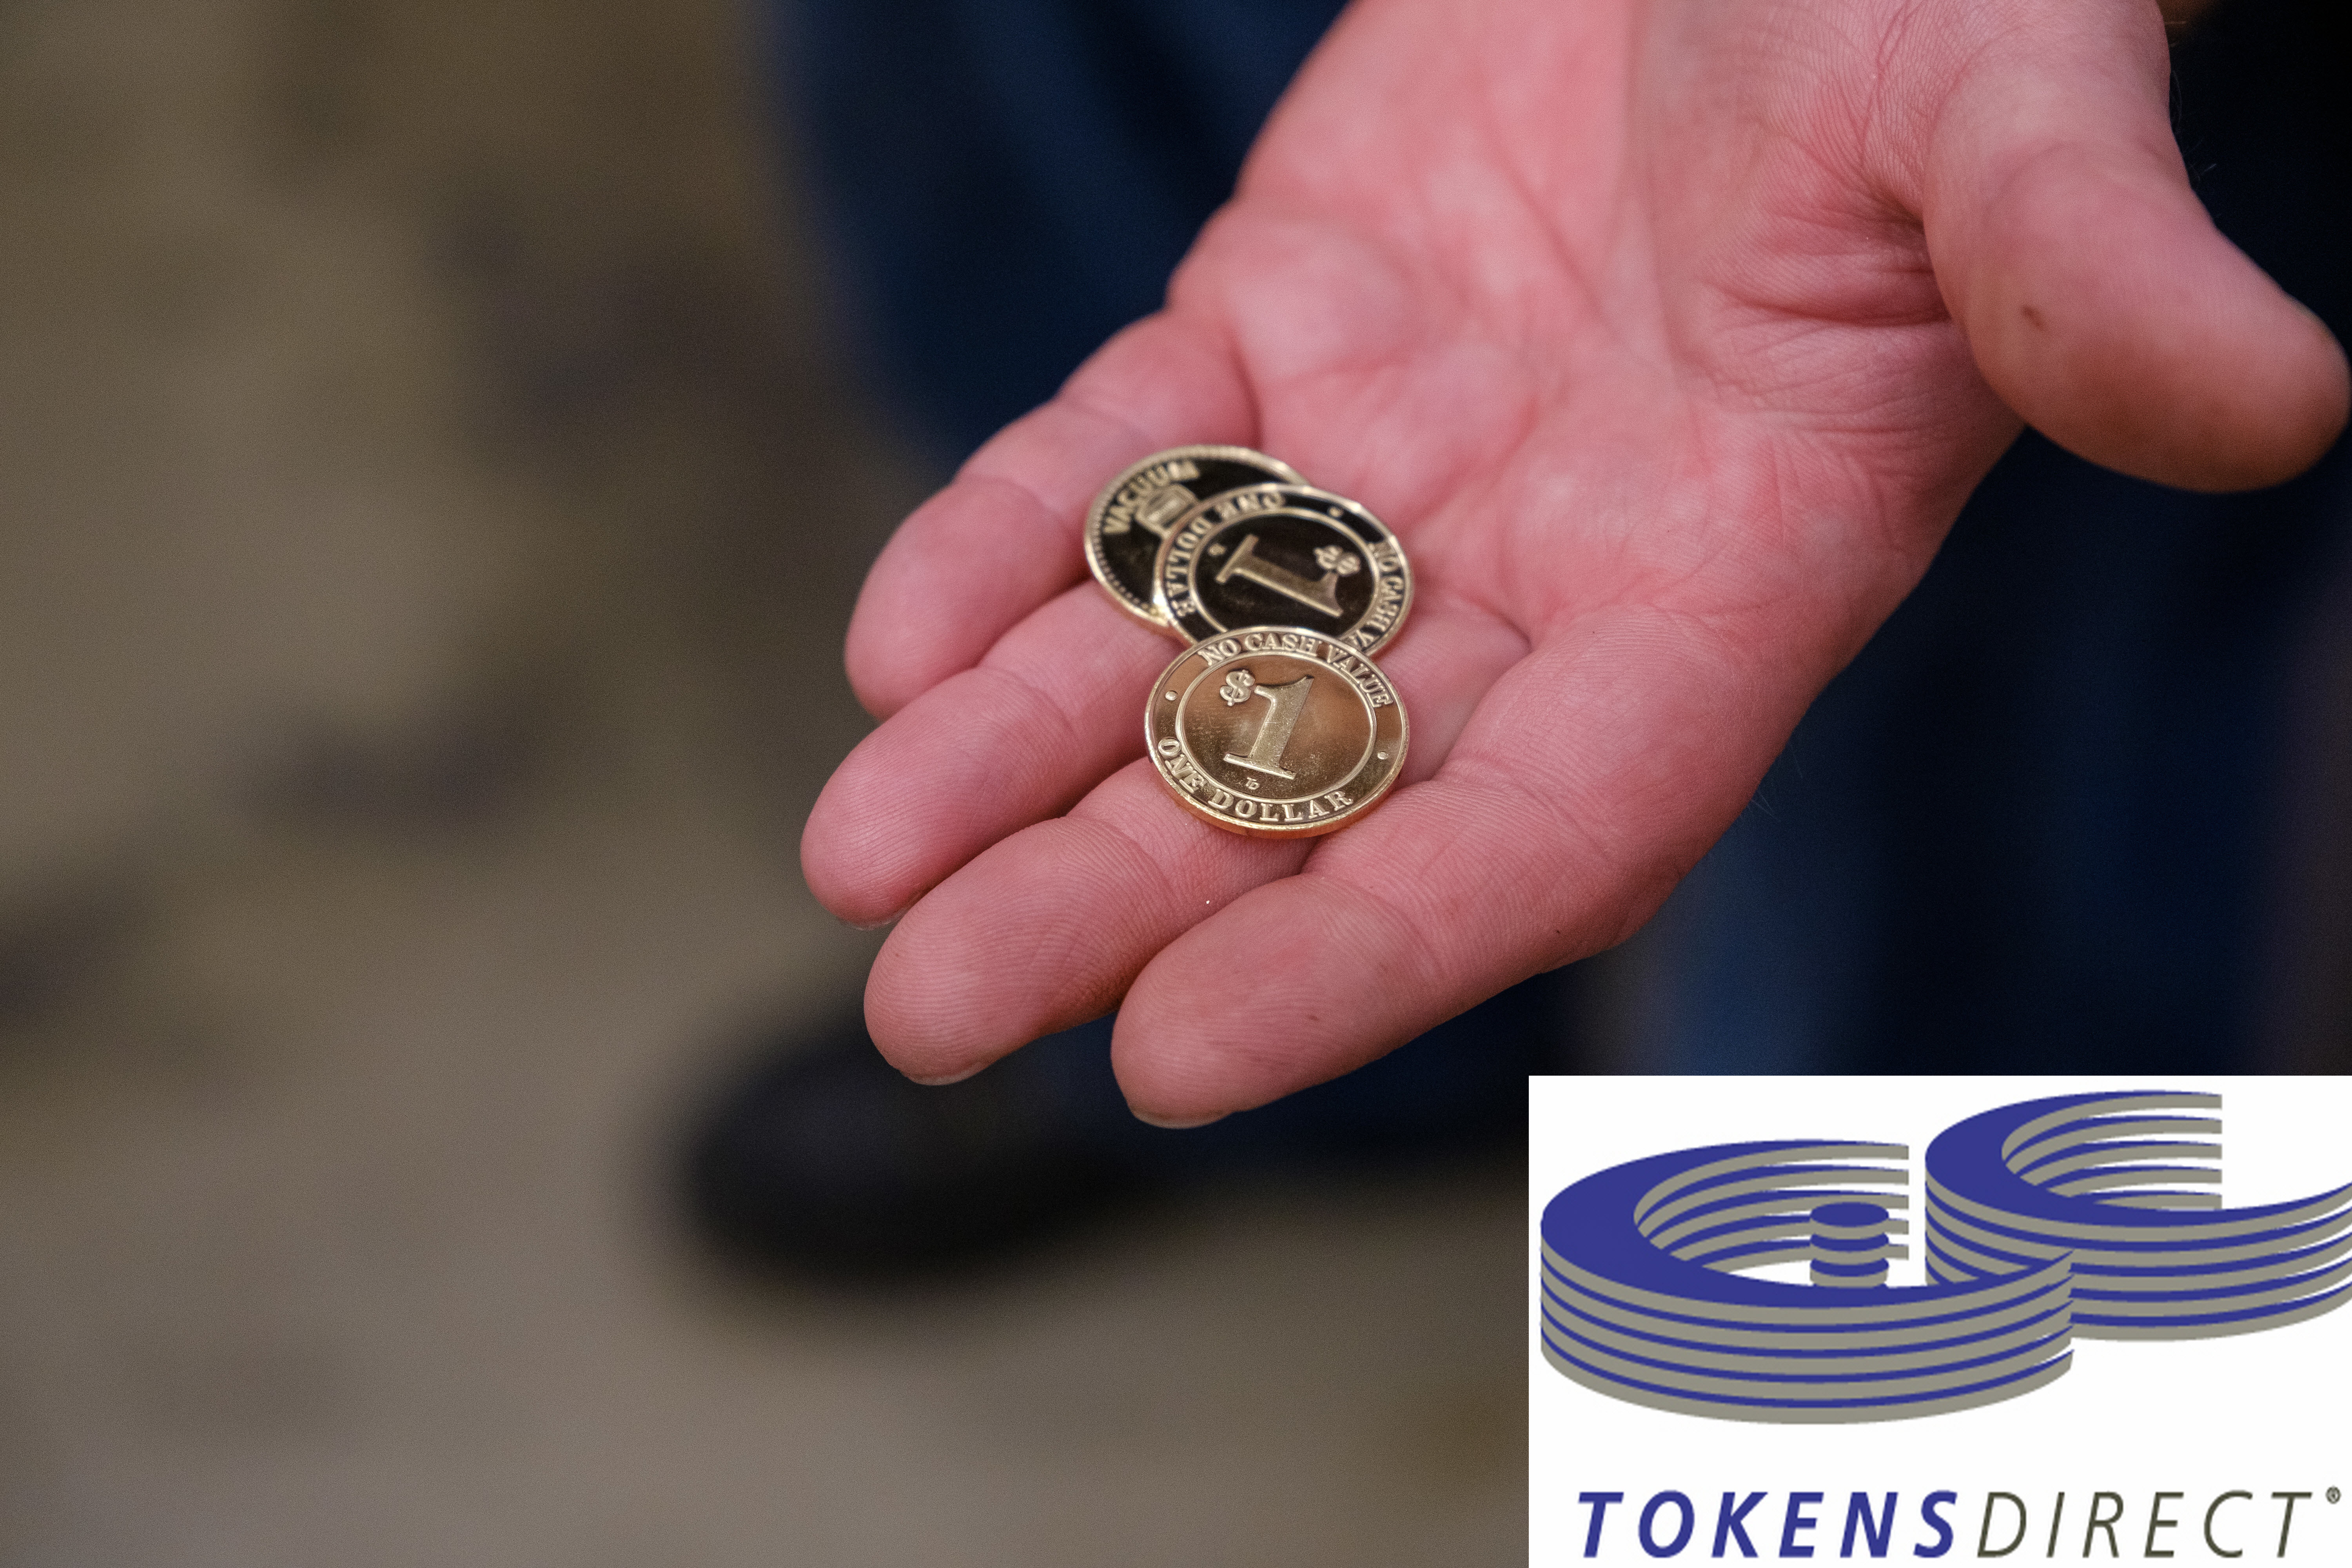 Picture Two: TokensDirect and the Up-Down Tokens for Poke’ns Campaign – 20 FREE Tokens with proof of Covid-19 Vaccination. #TokensDirect